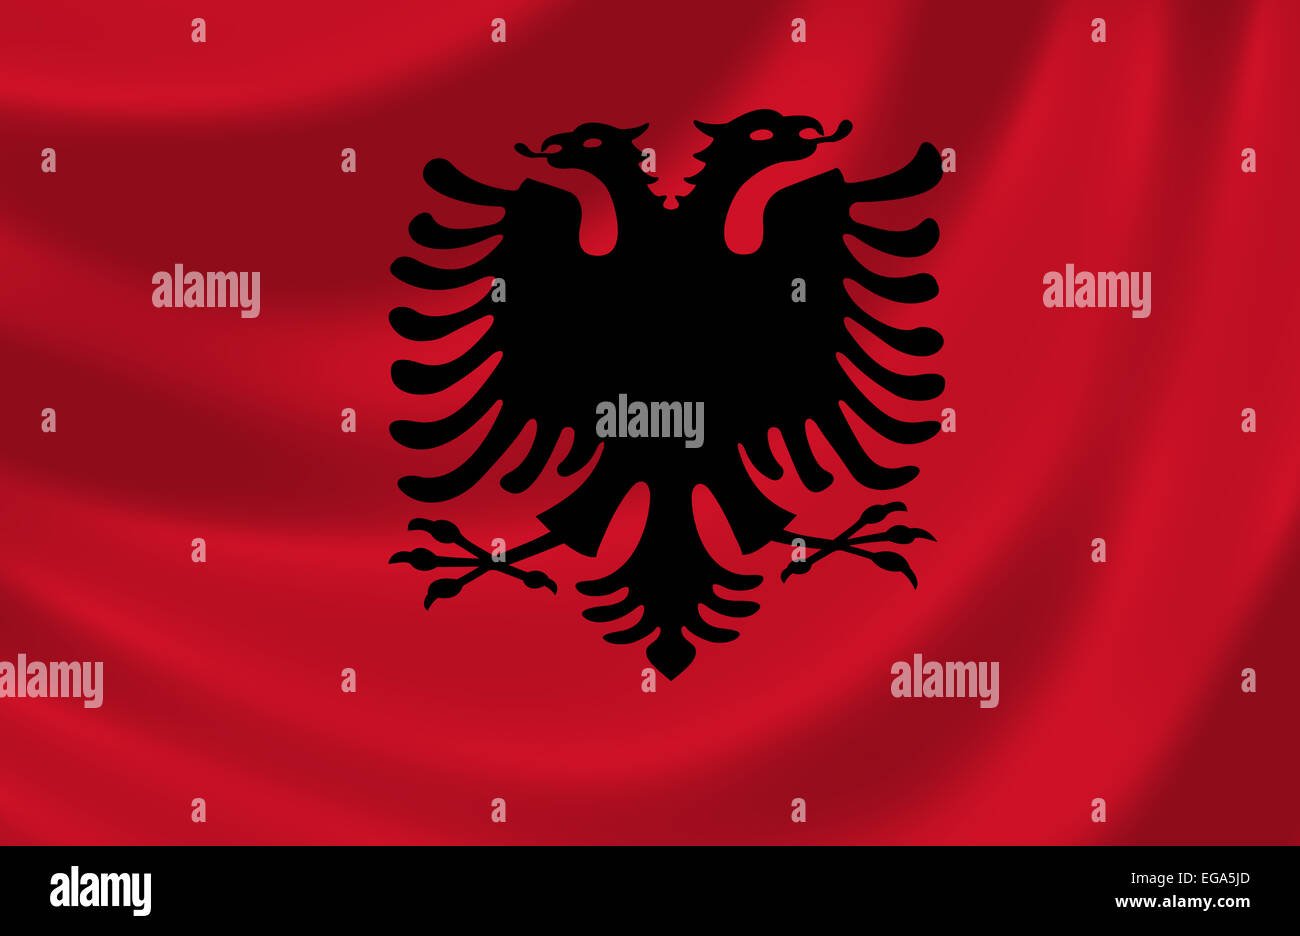 Flag of Albania waving in the wind Stock Photo